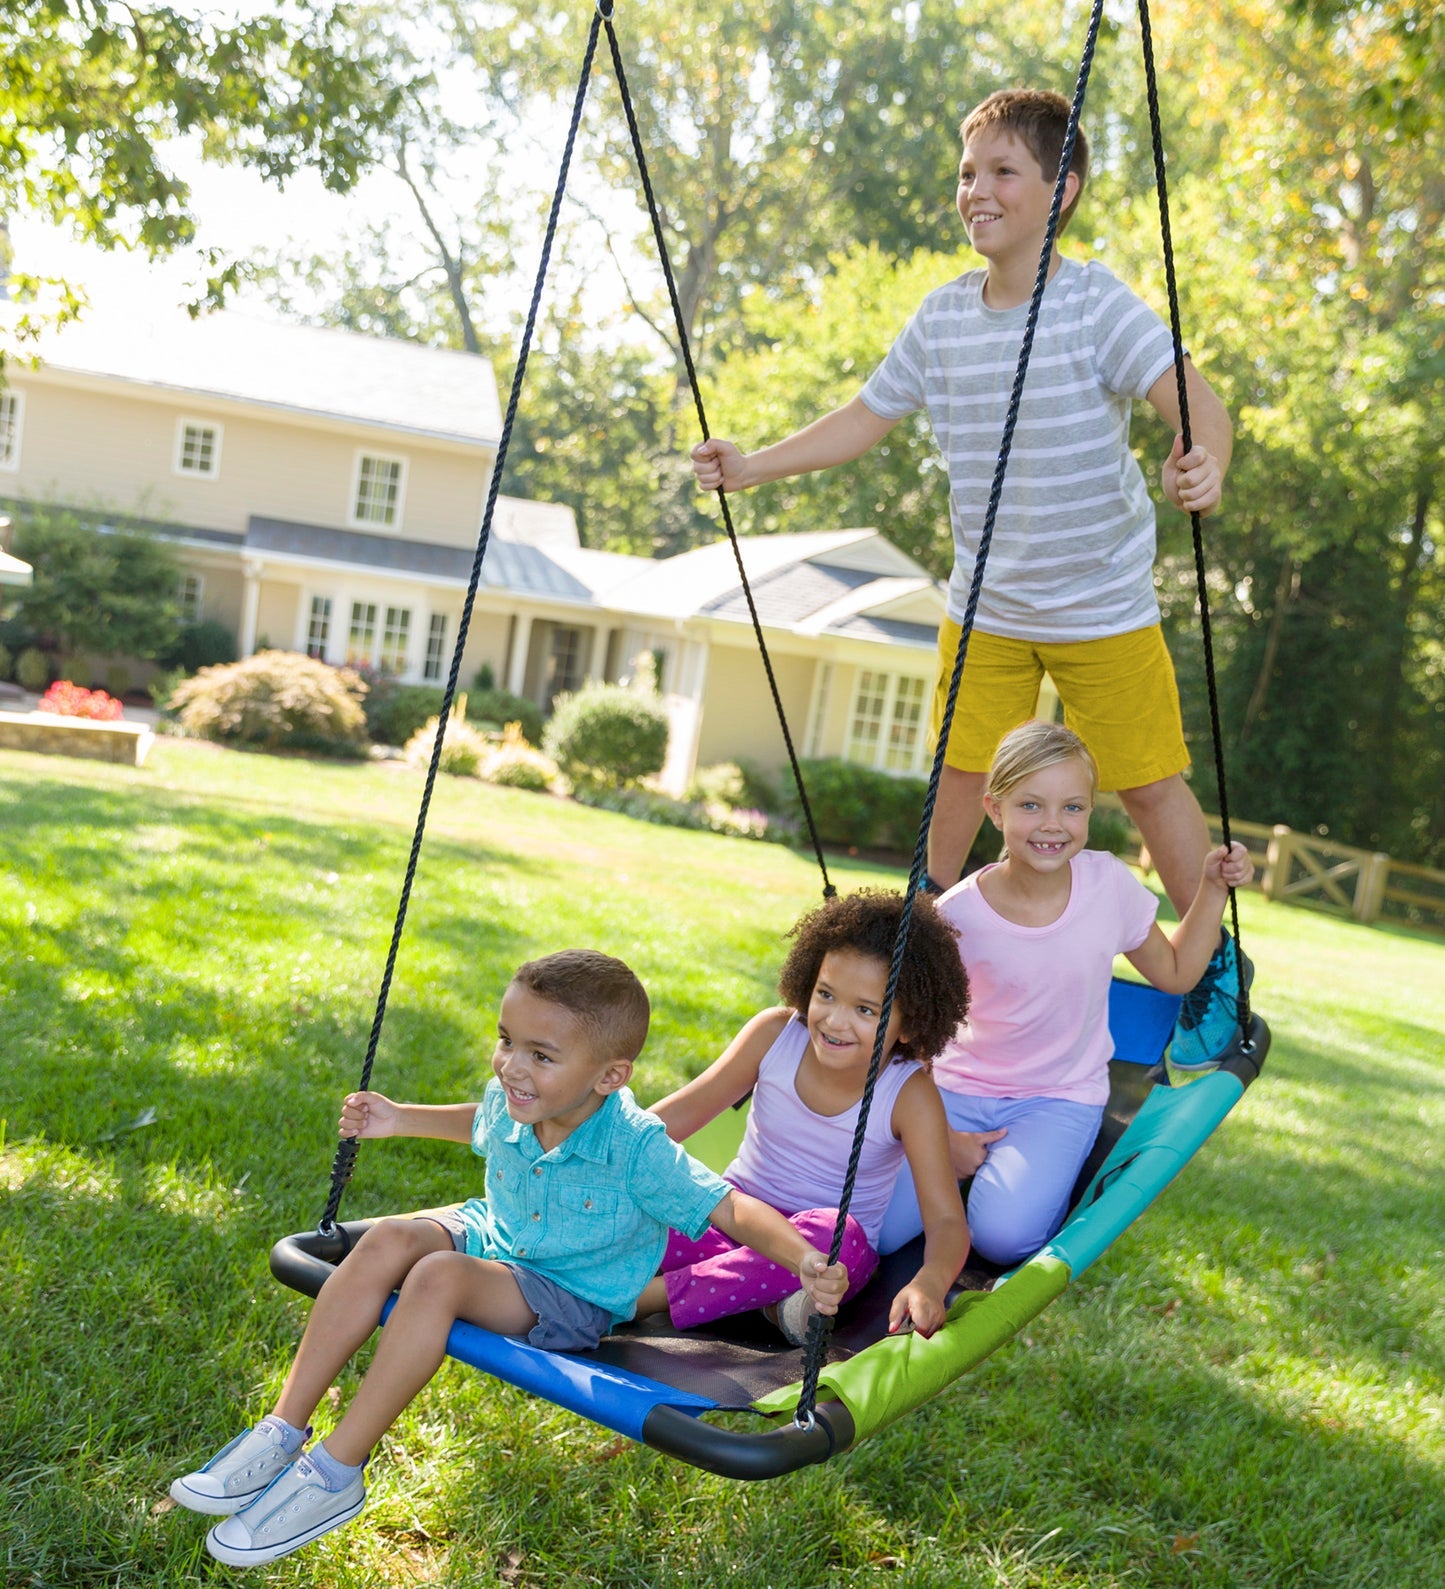 Three children sit on the Colorful Super Platform Swing and one stands at the rear. They are all smiling and looking in the same direction.